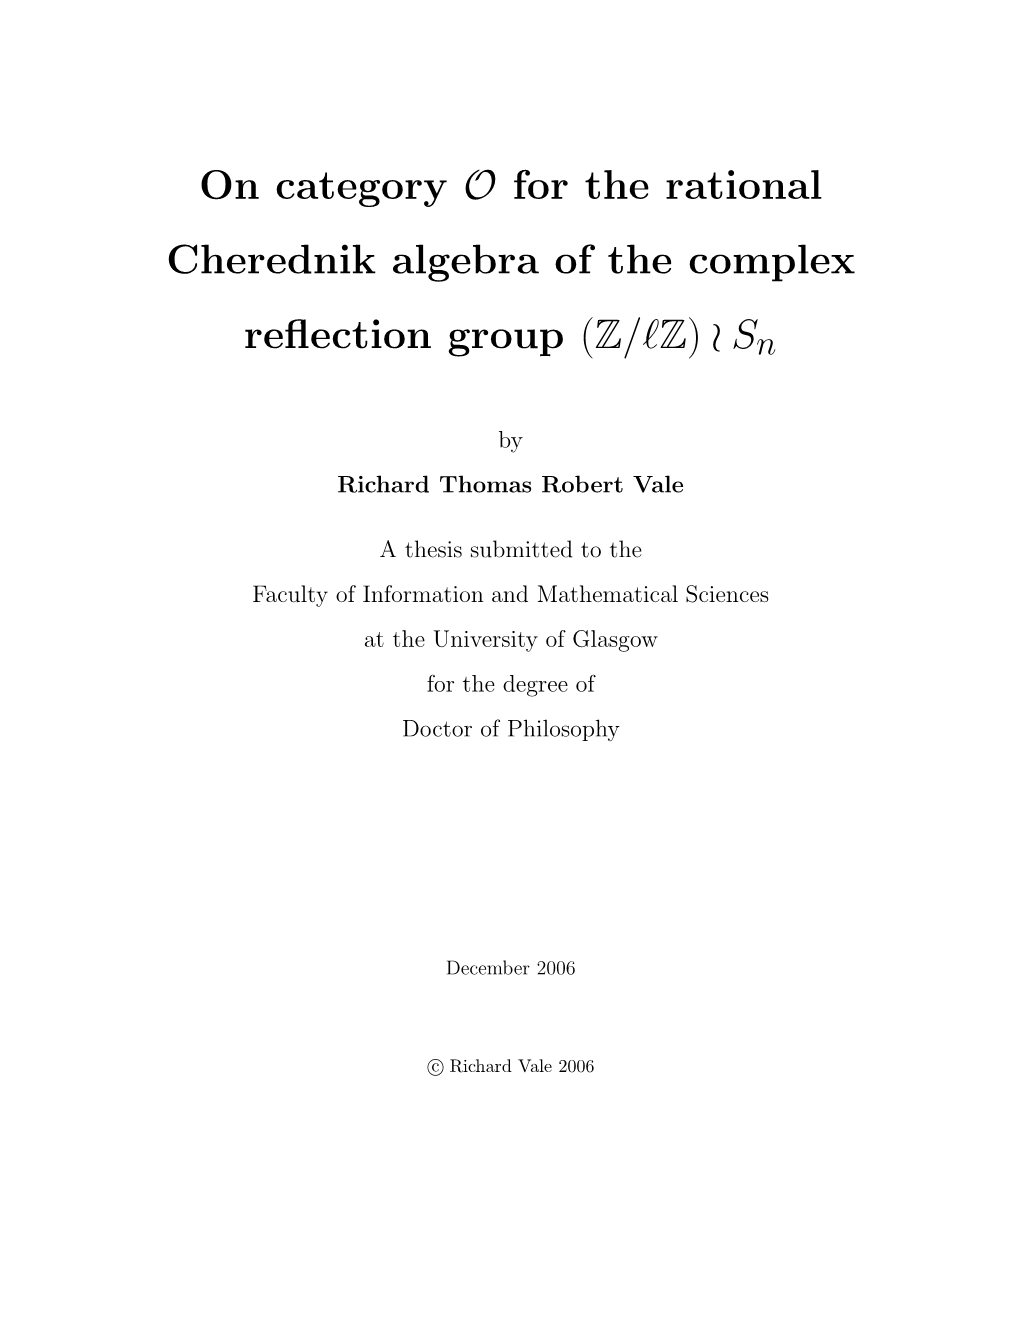 On Category O for the Rational Cherednik Algebra of the Complex Reflection Group